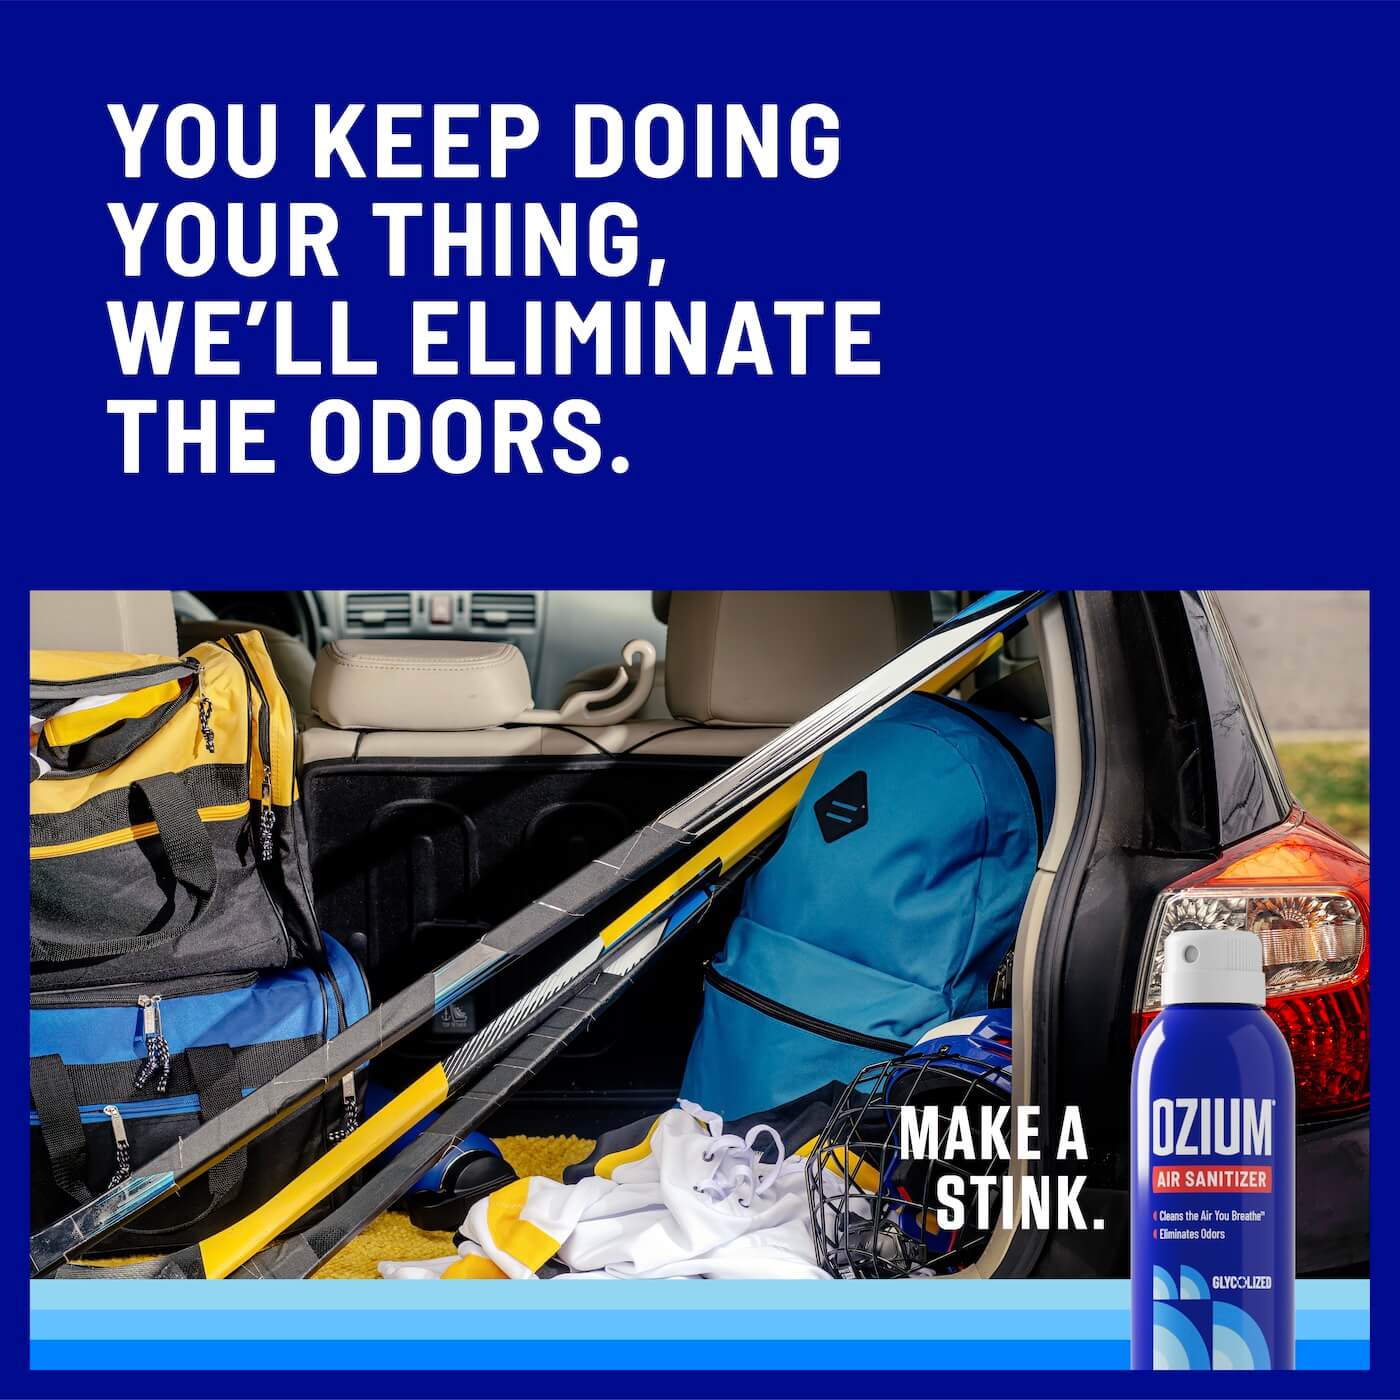 You keep doing your thing, we'll eliminate the odors. Image of Ozium and a car trunk with hockey sticks and a backpack.